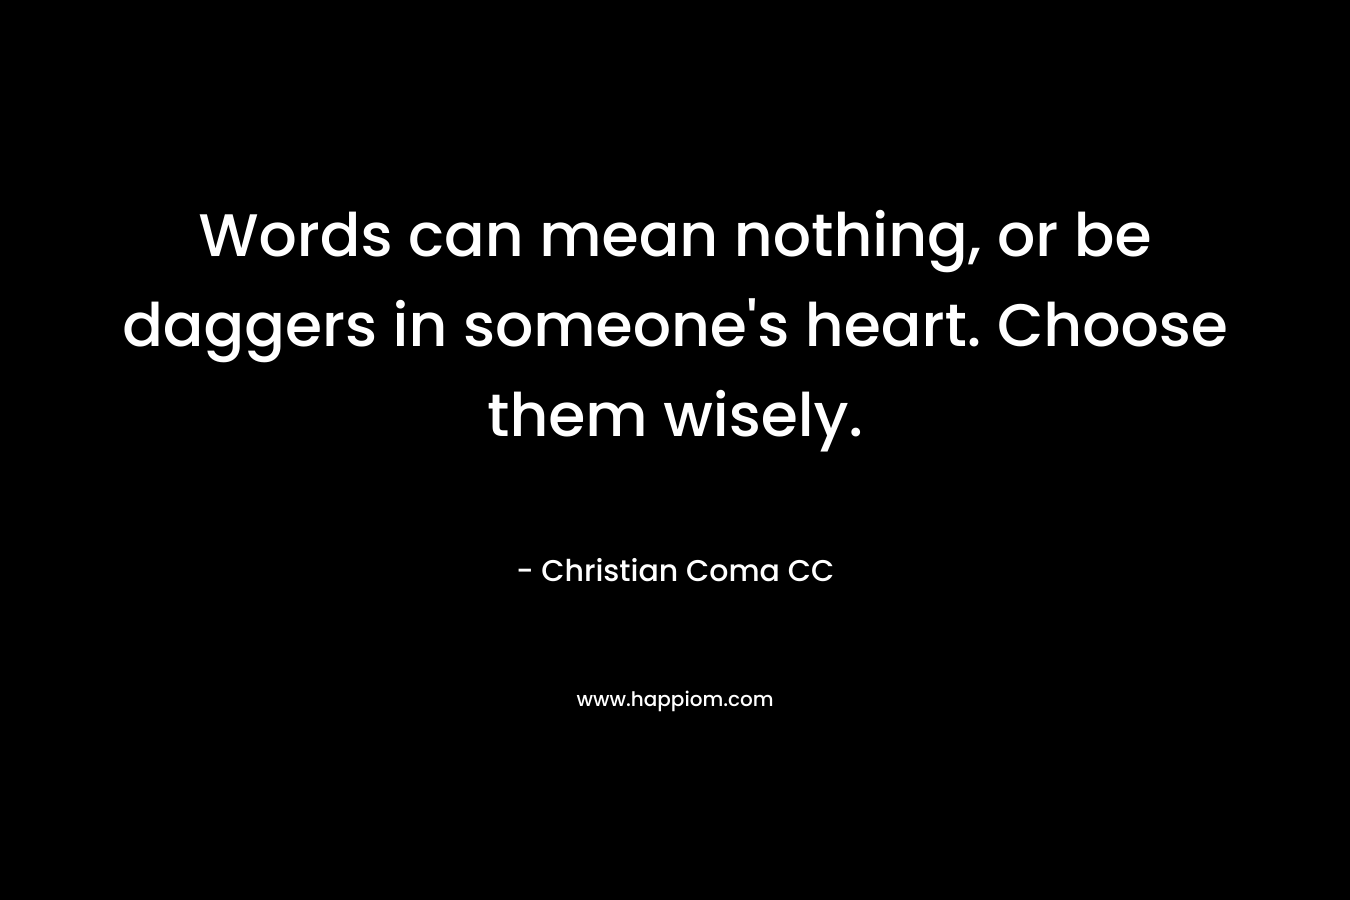 Words can mean nothing, or be daggers in someone’s heart. Choose them wisely. – Christian Coma CC